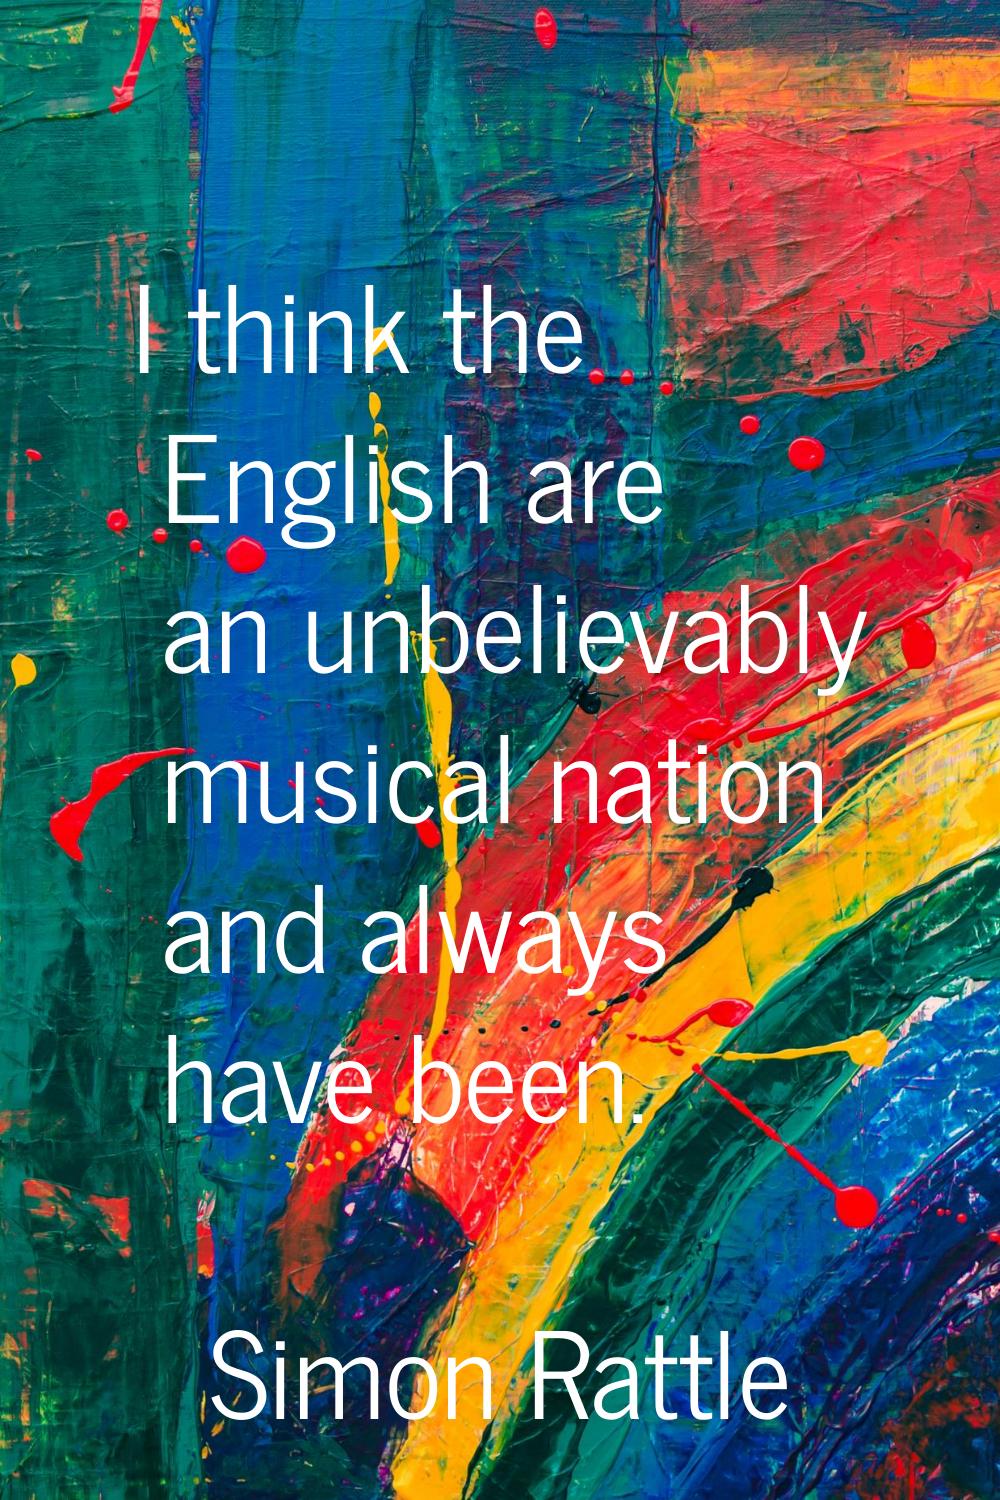 I think the English are an unbelievably musical nation and always have been.